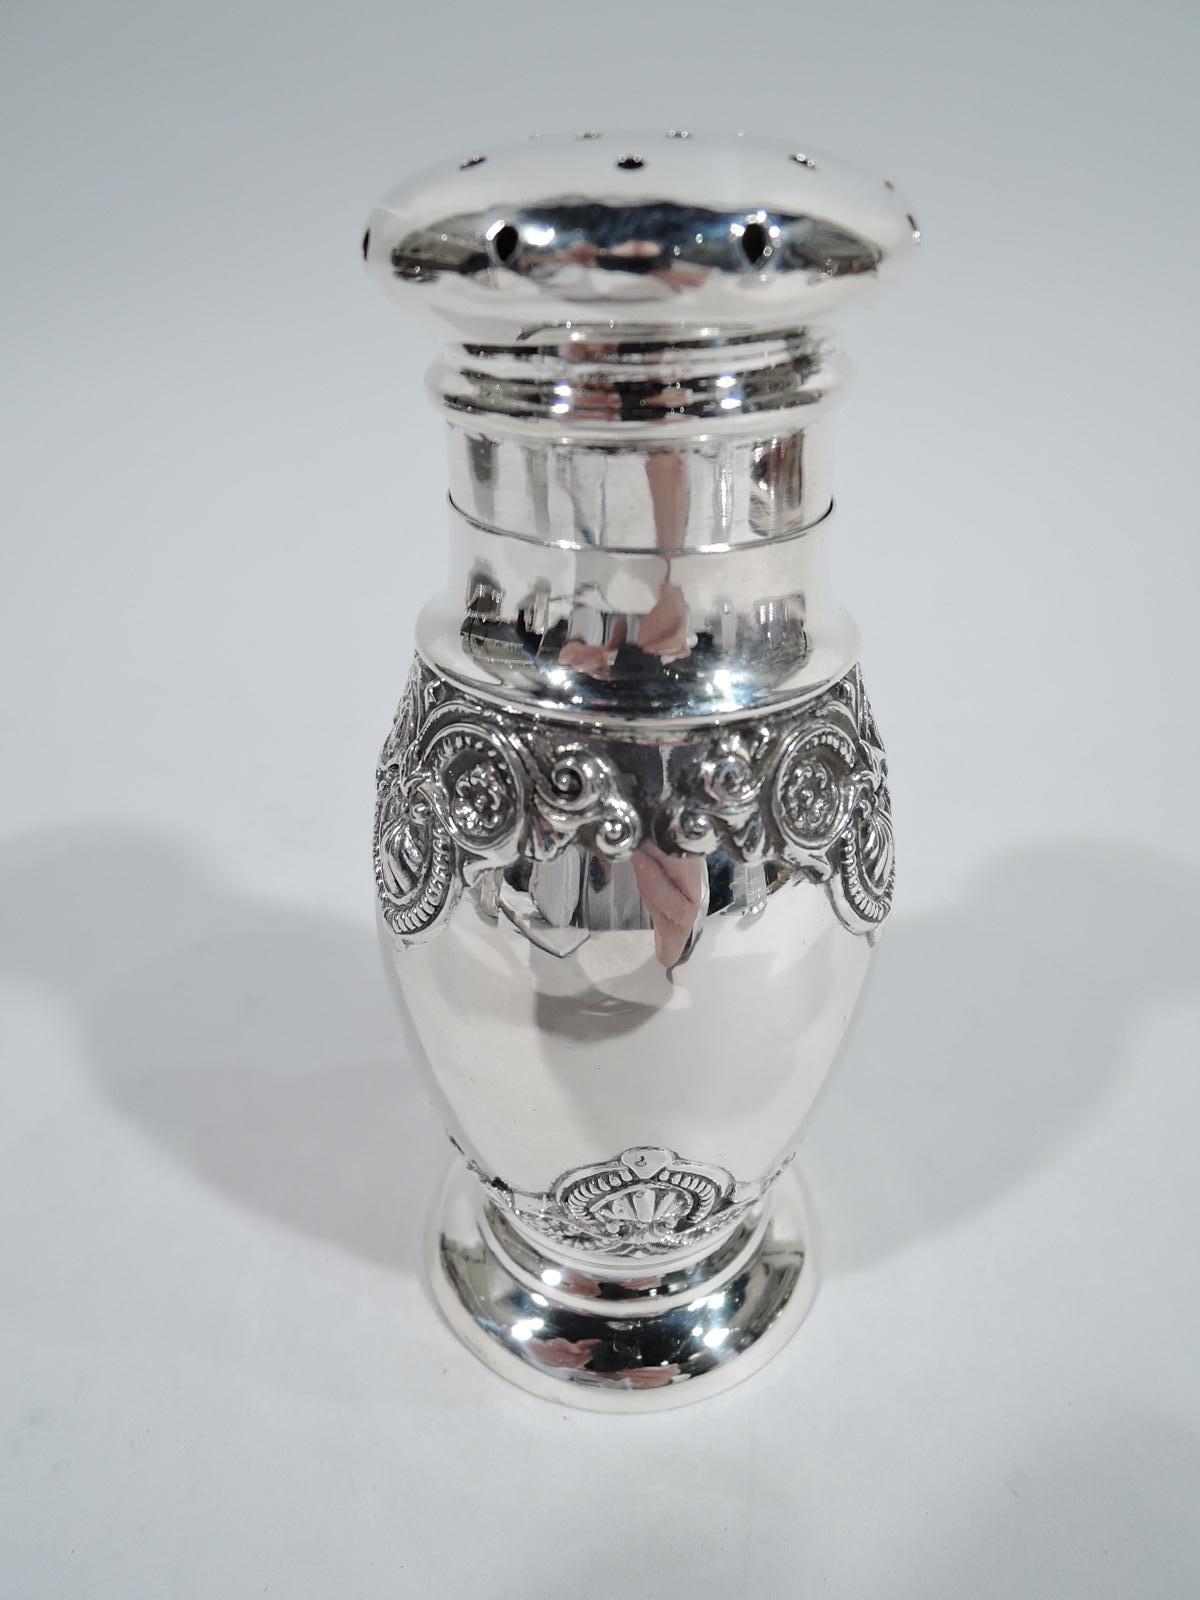 American classical sterling silver sugar shaker, ca 1910. Ovoid body on round and raised foot. Pierced and overhanging cover. Applied scallop shells and flower heads in gadrooned and leafing frames. Marked “Sterling”. Weight: 4.5 troy ounces.